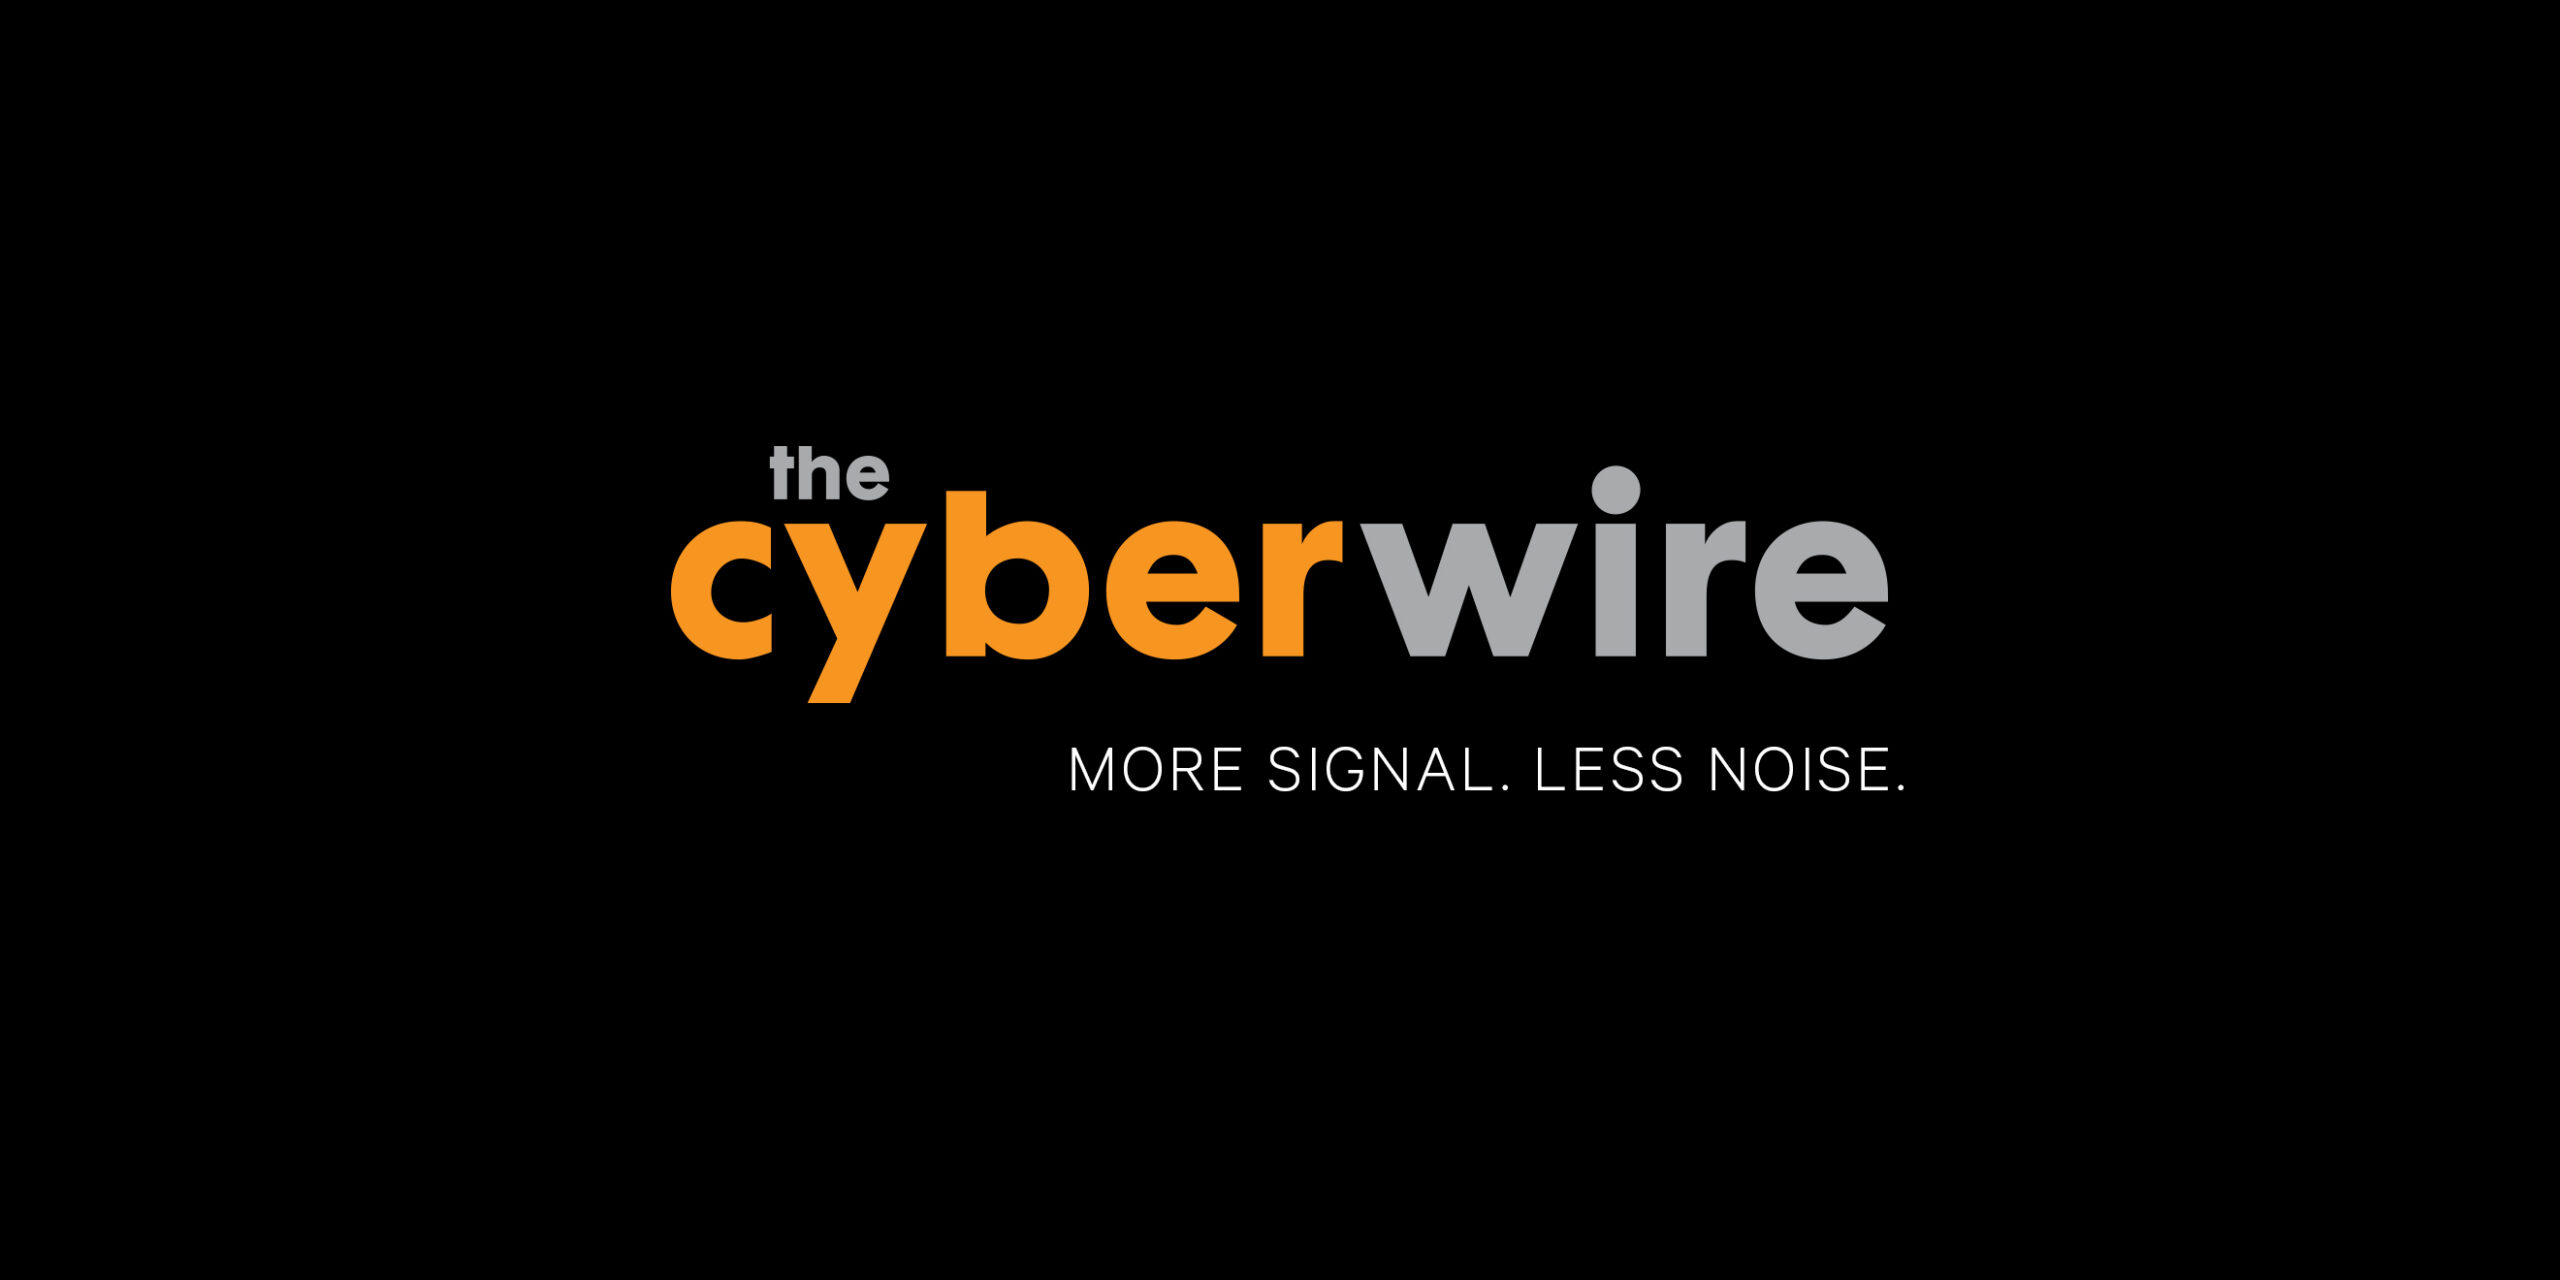 Prioritizing data, security, and observability - The CyberWire Podcast